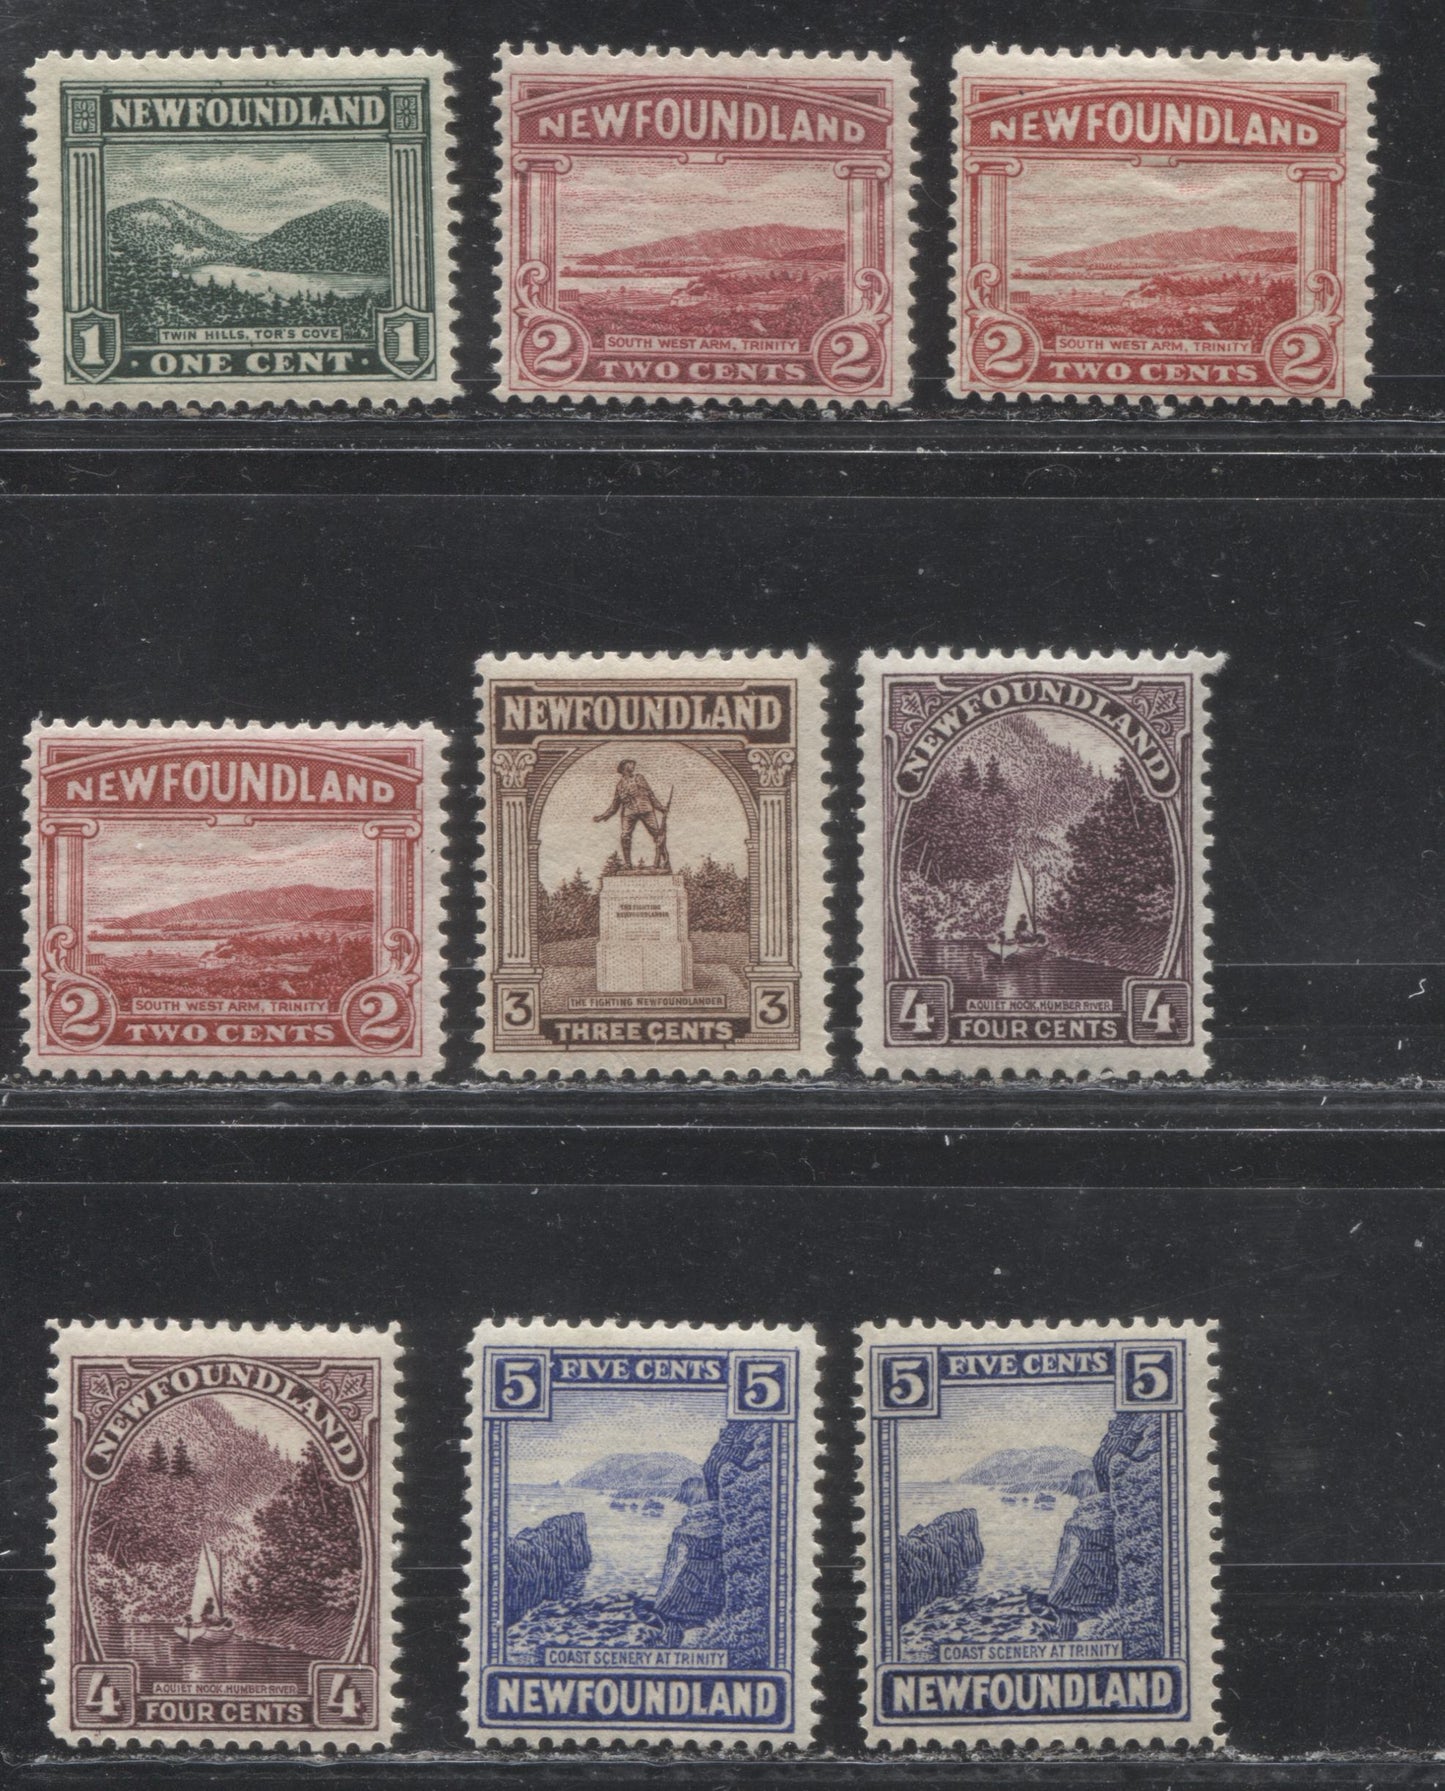 Lot 53 Newfoundland # 131-135 1c-5c Dark Green - Deep Ultramarine Twin Hills - Trinity, 1923-1928 Pictorial Issue, Nine Fine OG Examples, Various Line and Comb Perfs